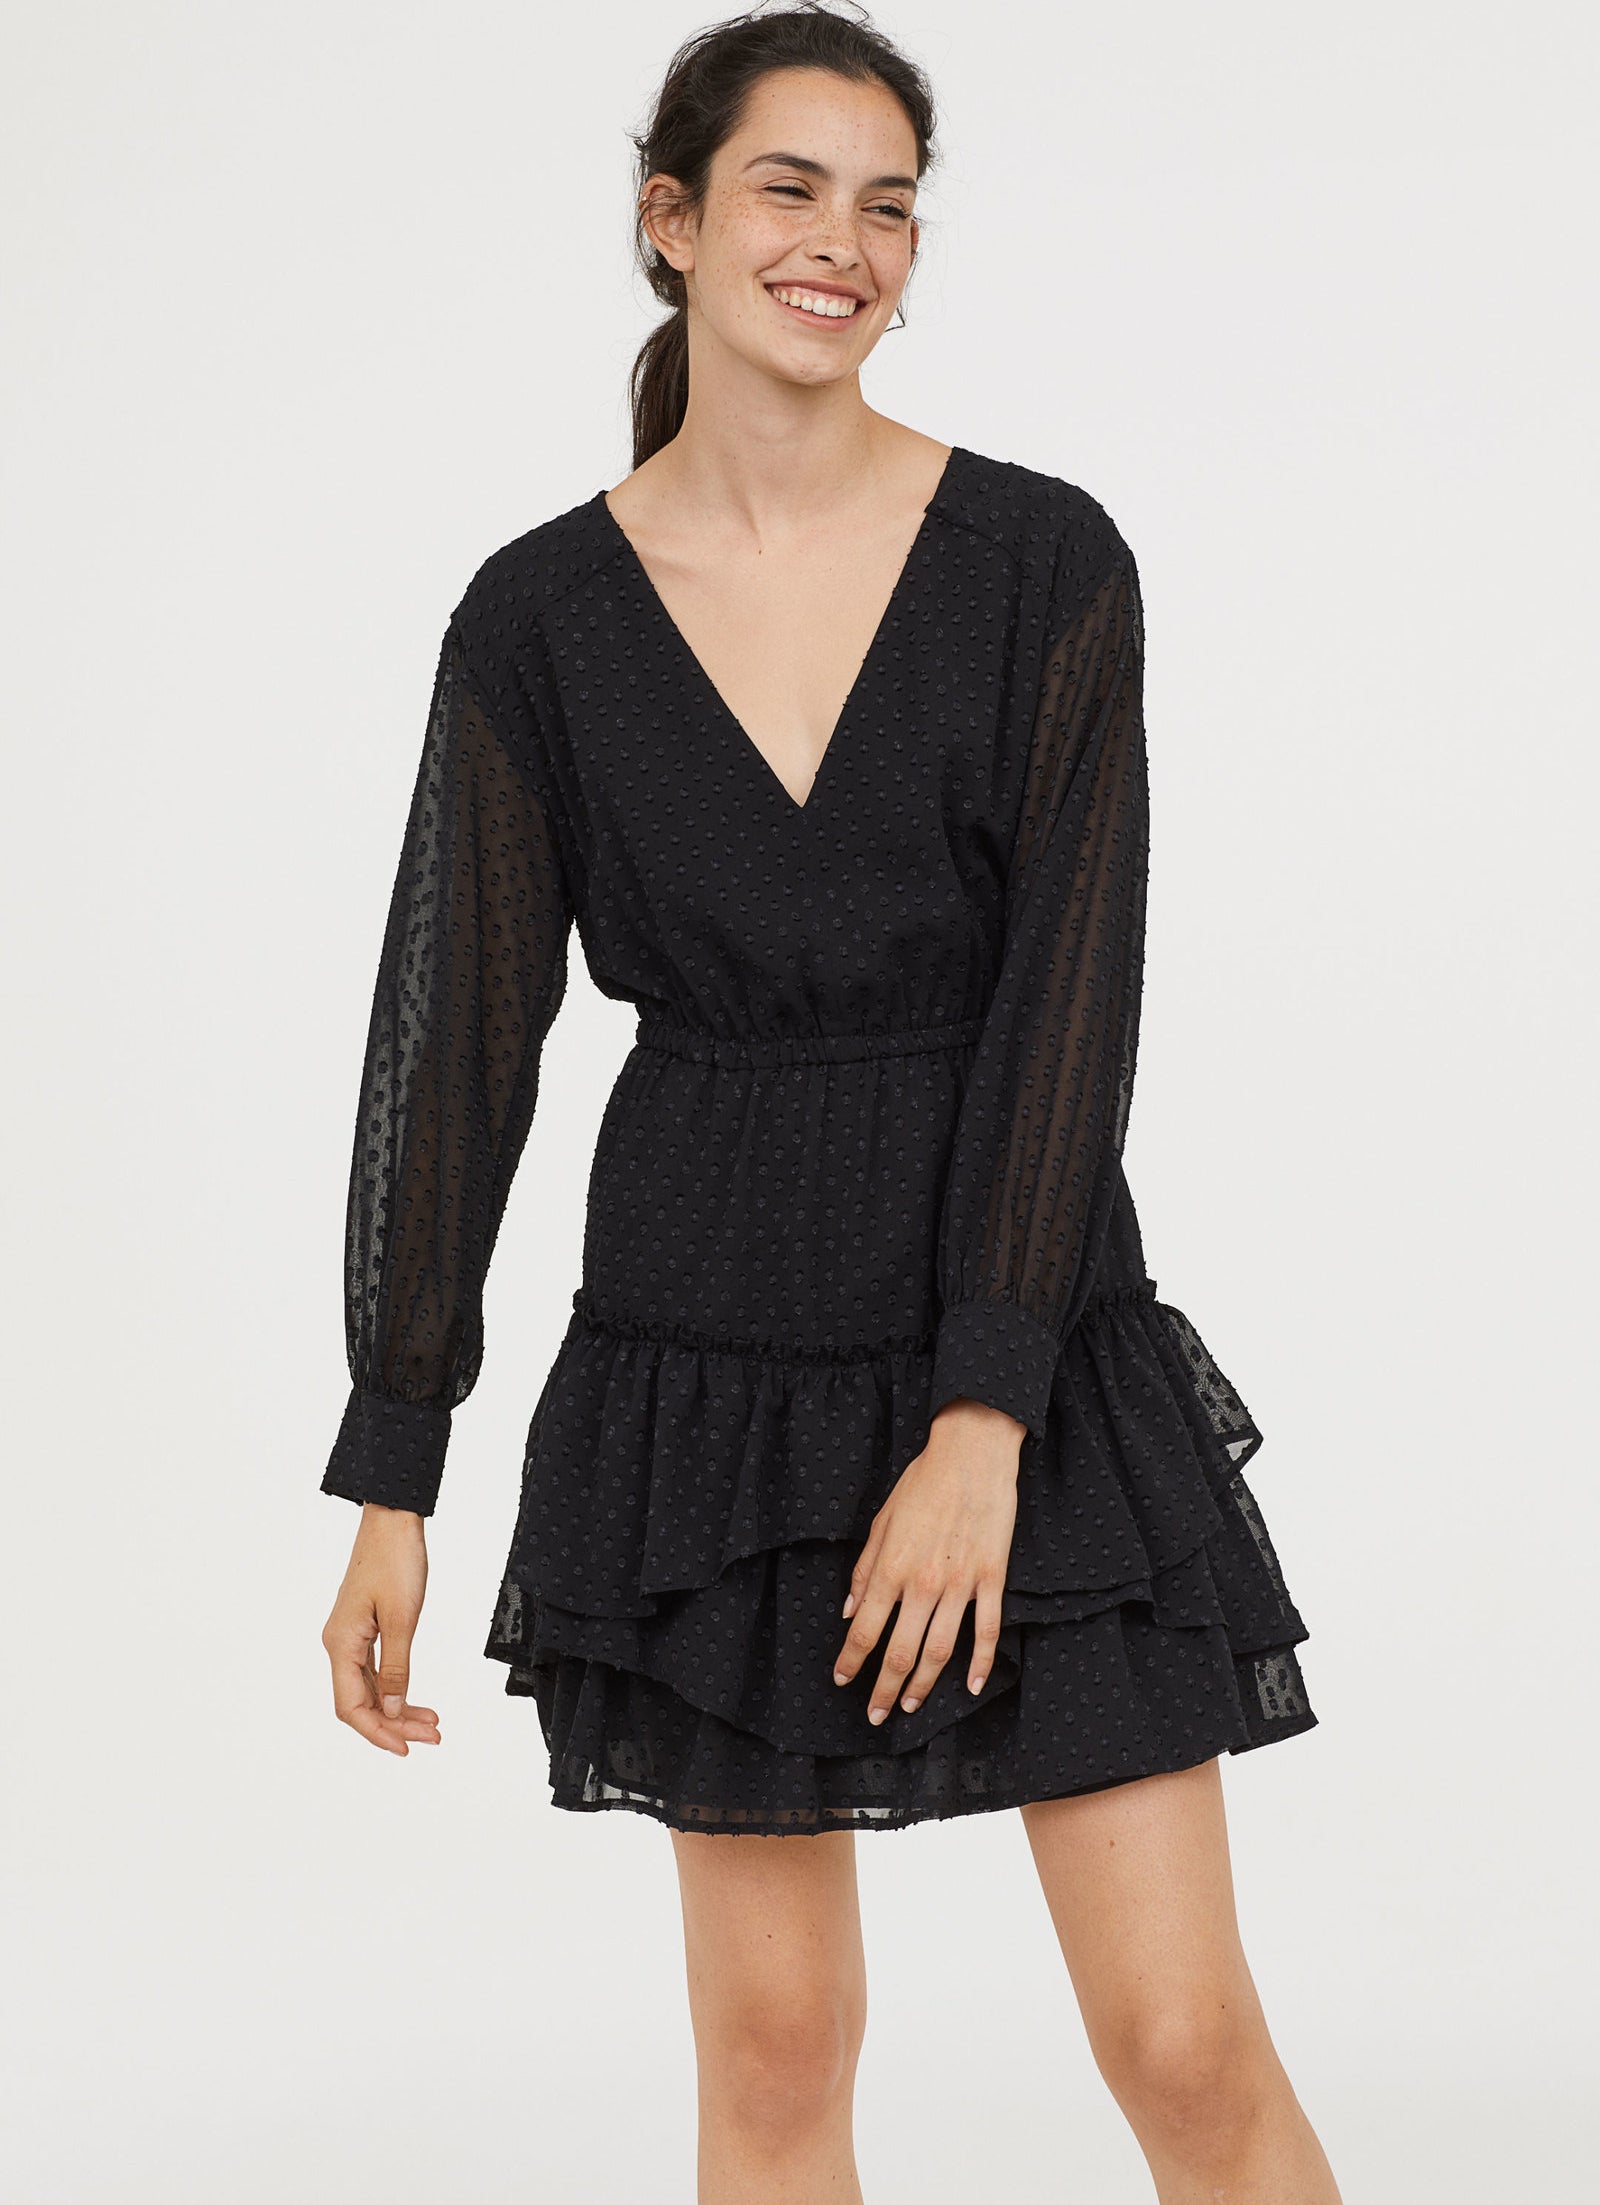 29 Gorgeous Little Black Dresses You Won't Want To Take Off